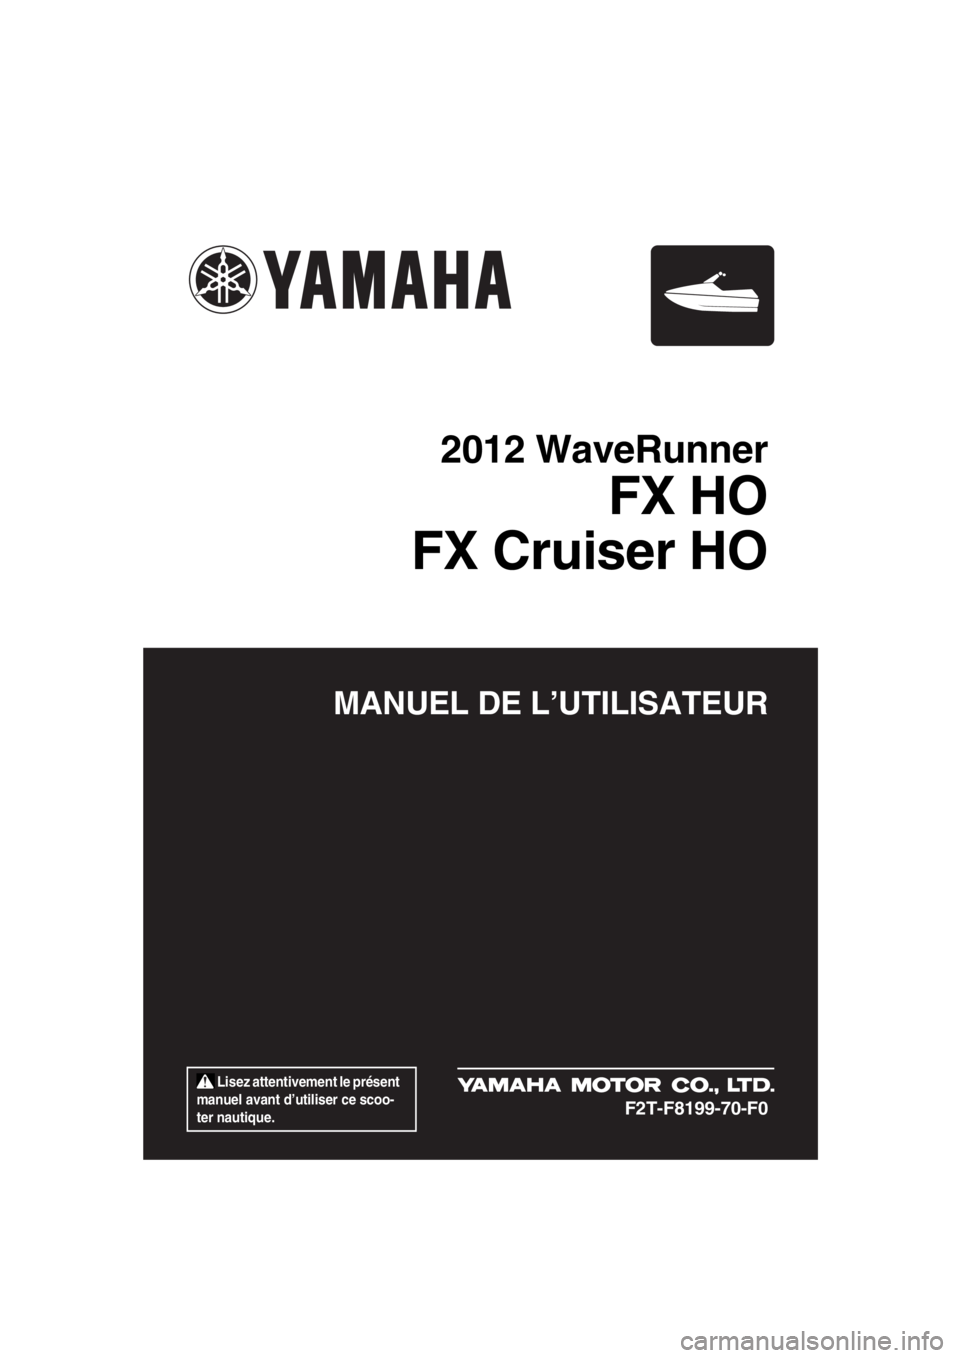 YAMAHA FX HO 2012  Notices Demploi (in French) 